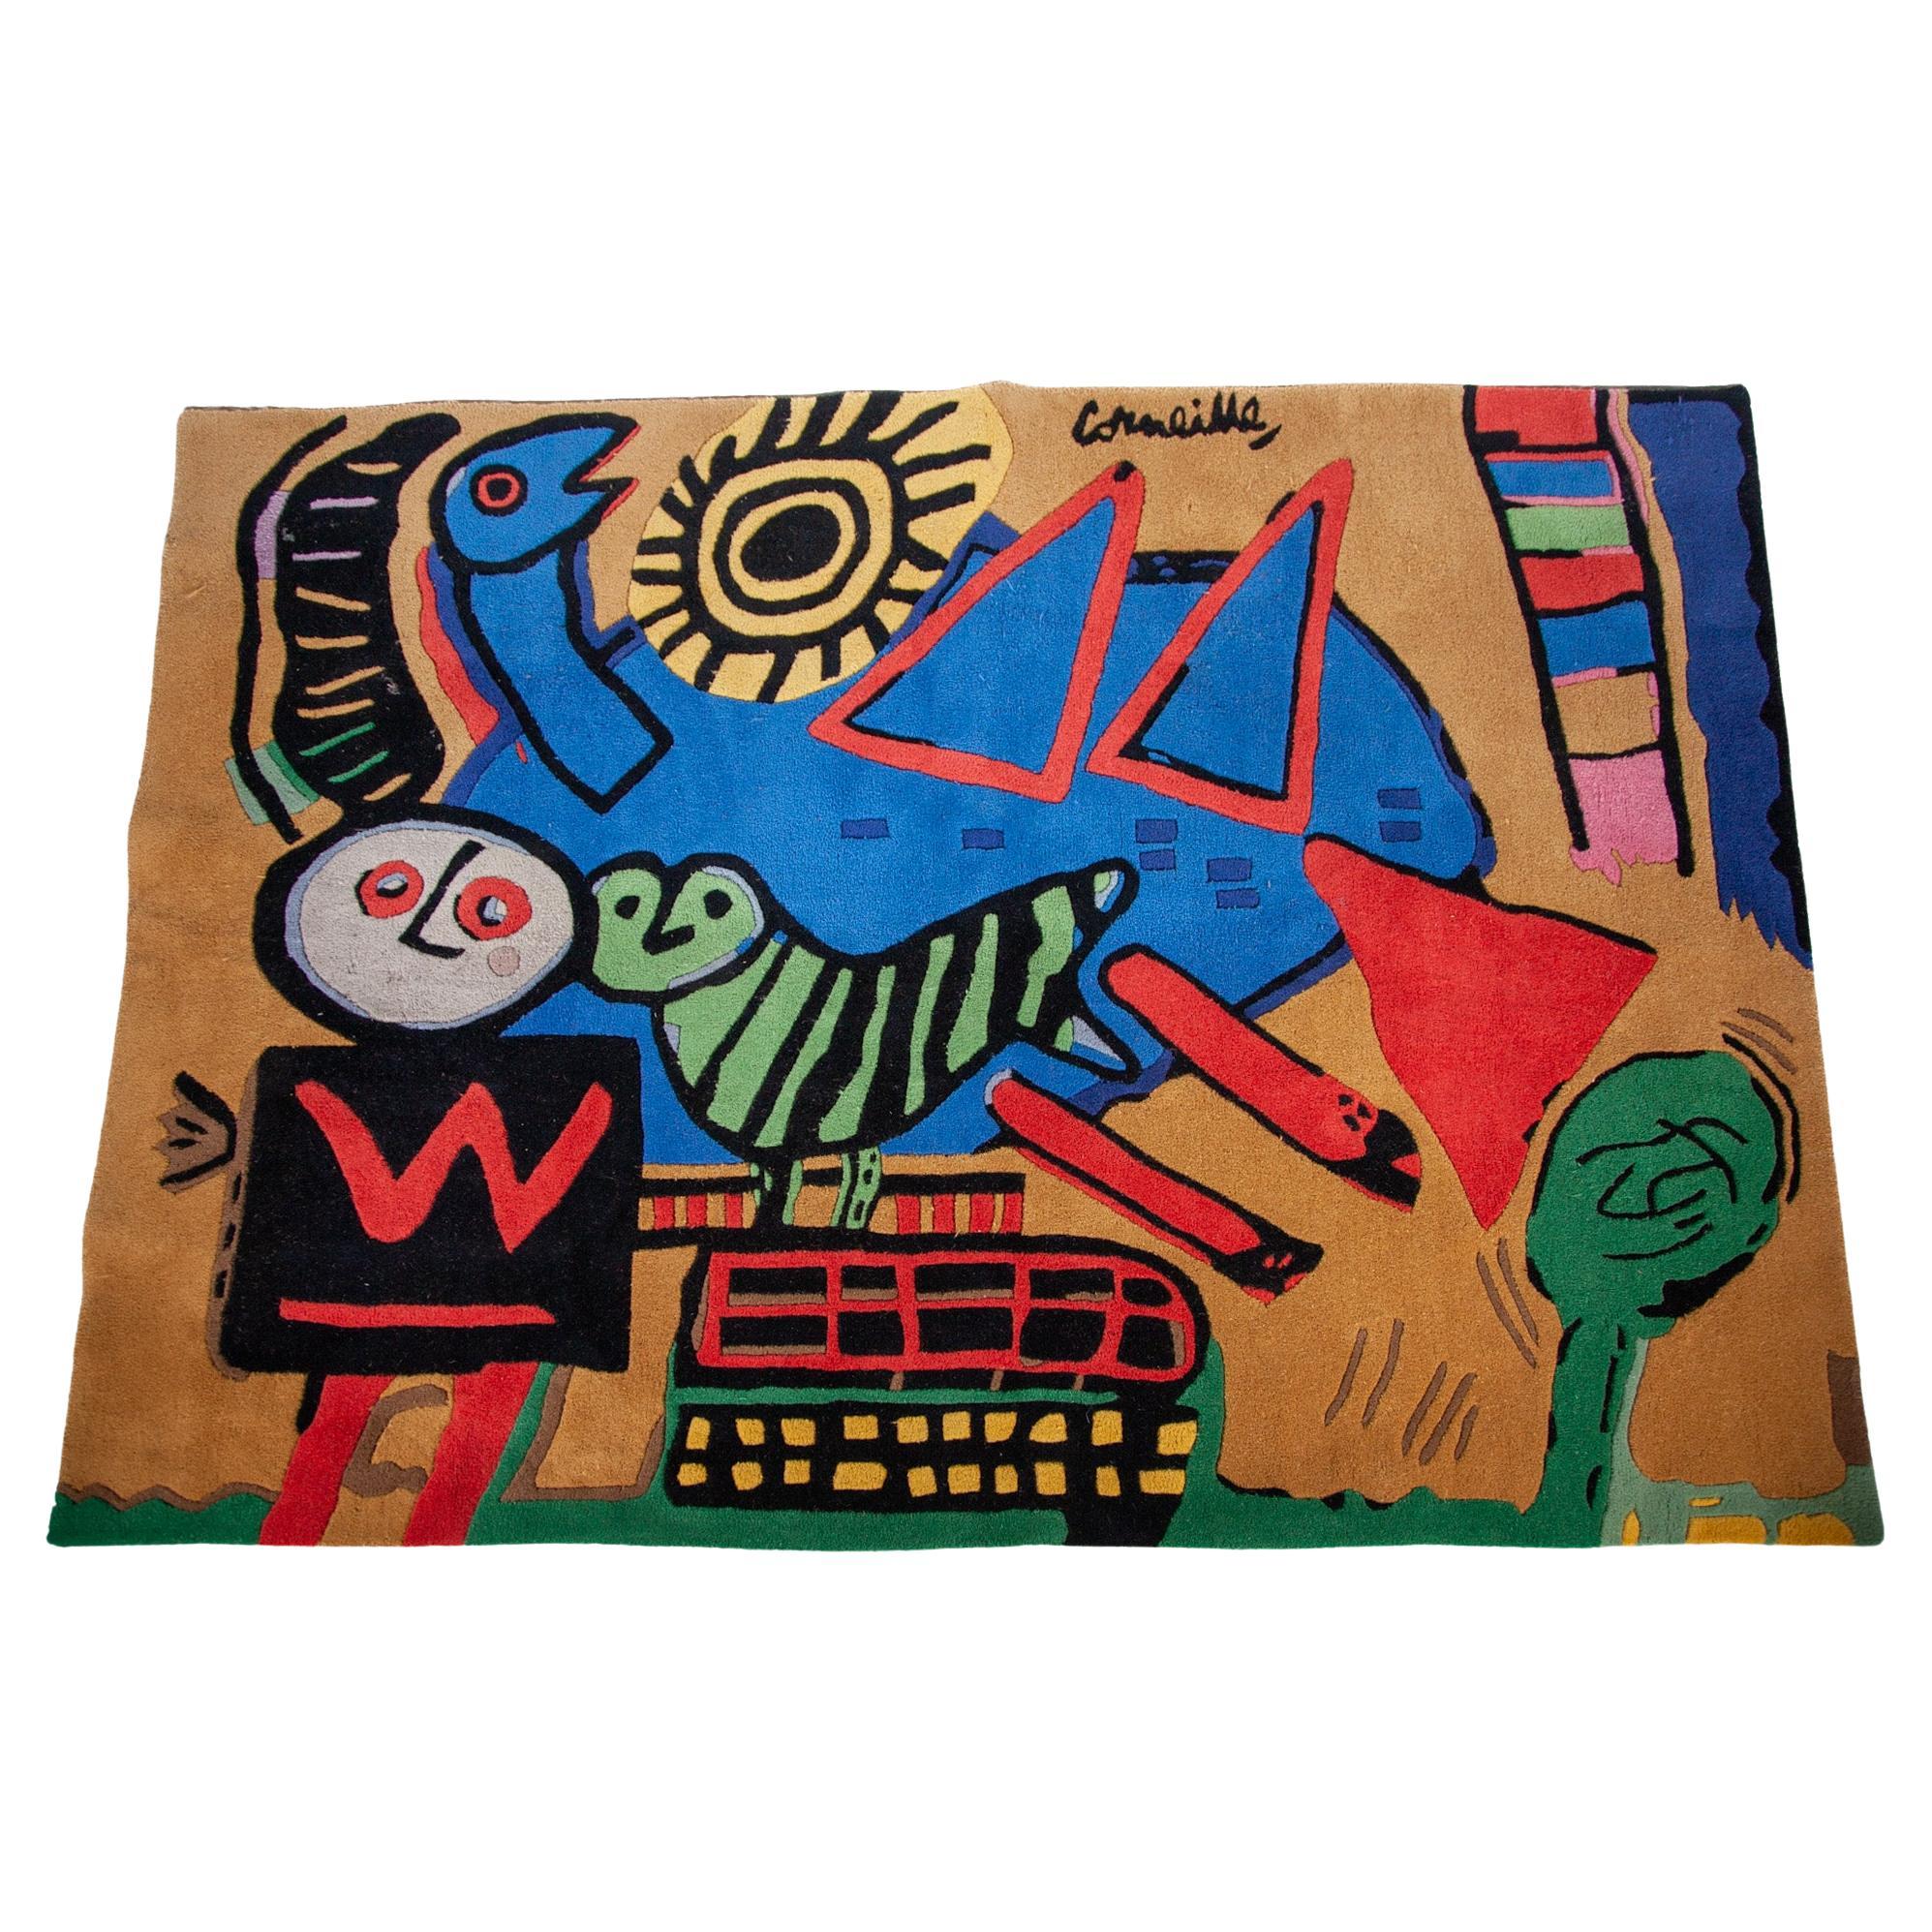 Limited edition rug made by Corneille and released by Van Til.Very nice and decorative rug after an artwork by Corneille, 1980s. This decorative rug was produced by van Til company in the 1980s. Only 121 of this rug were made this being number !!